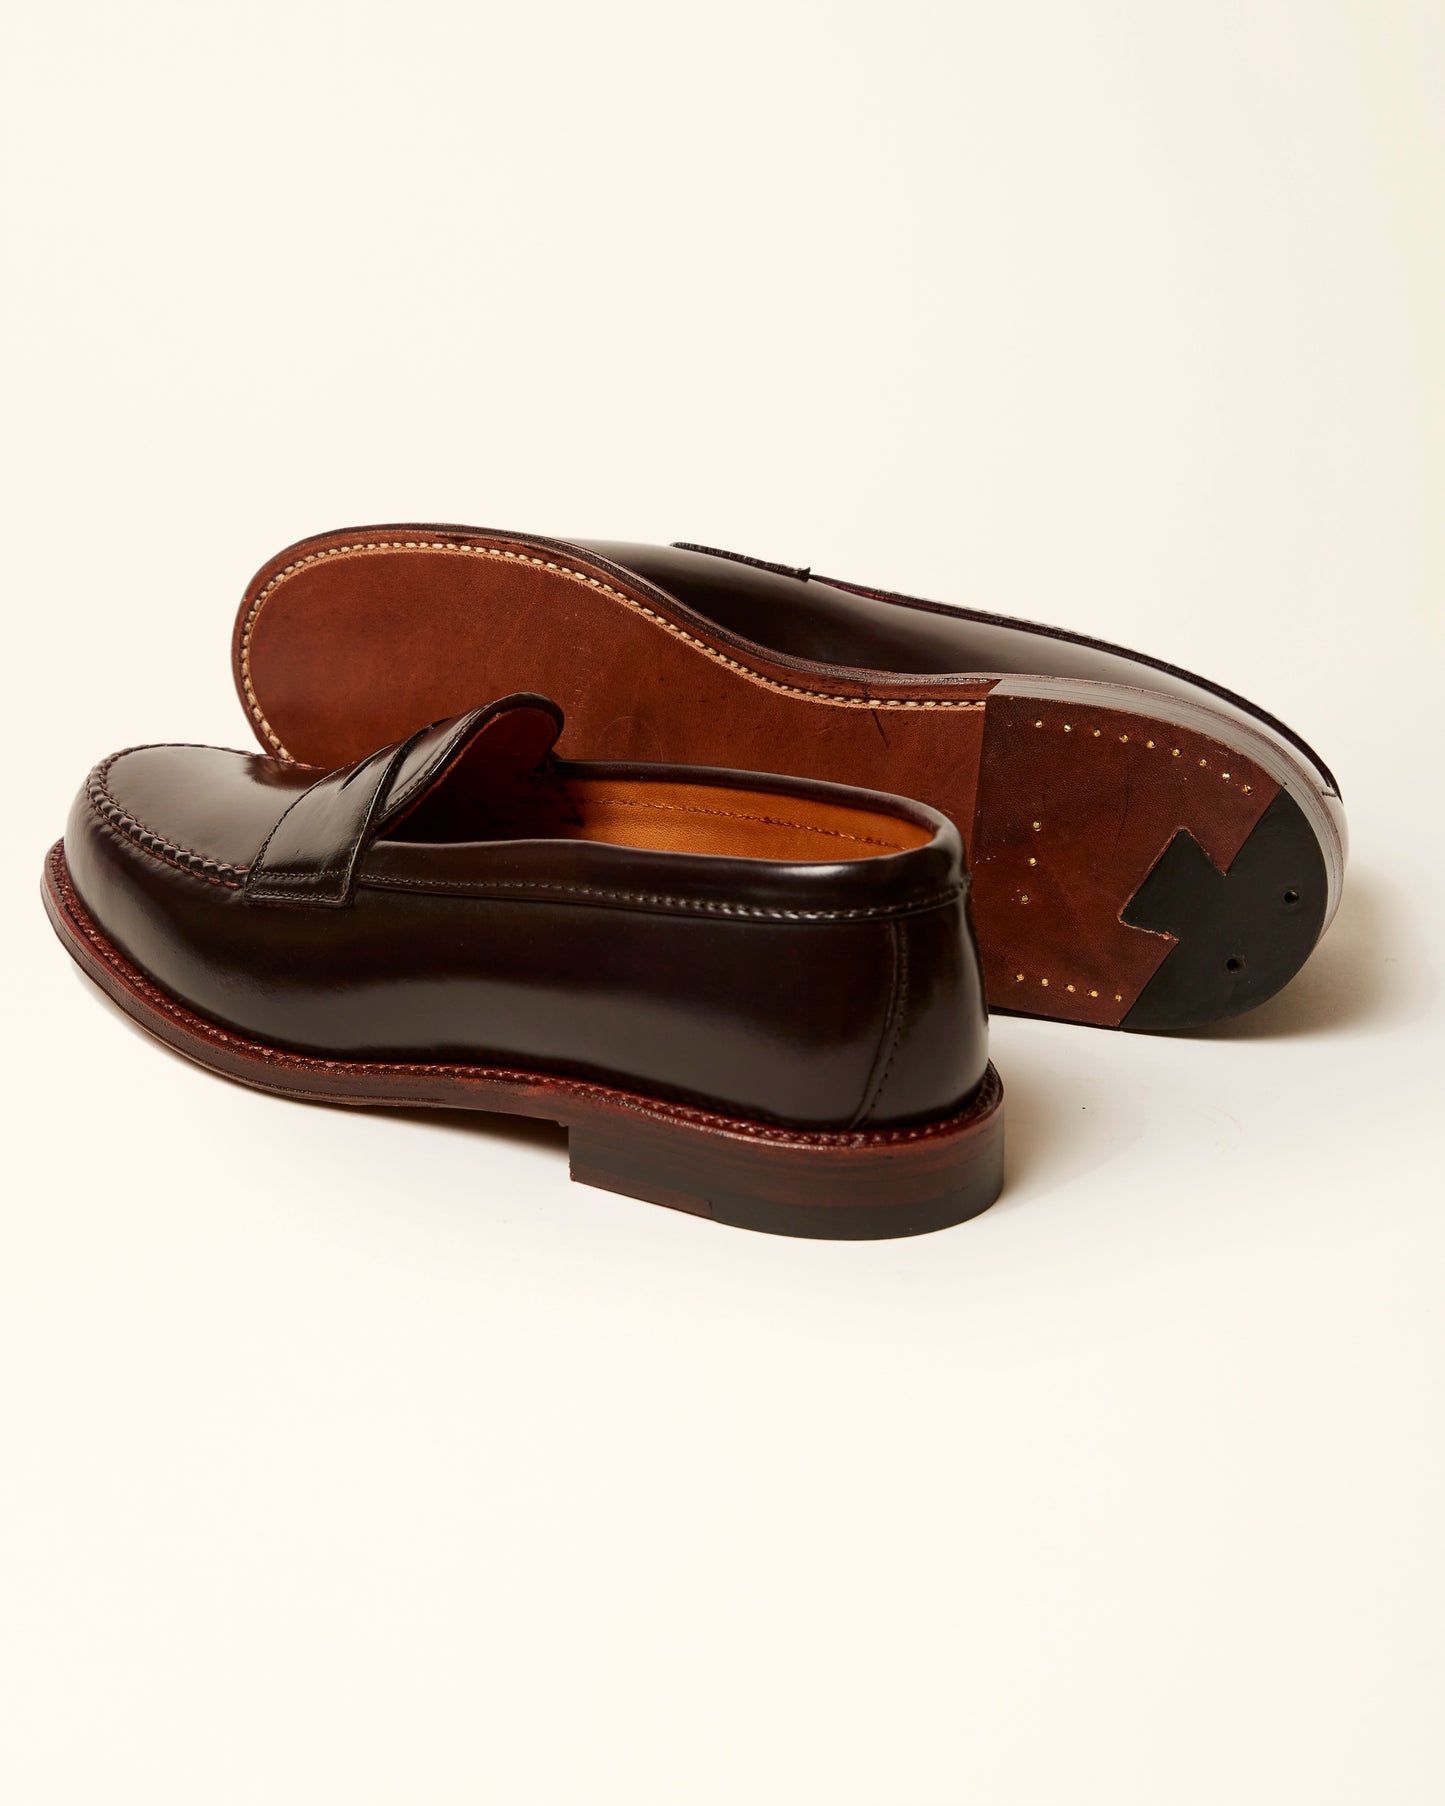 "University Loafer" 986A Leisure Handsewn Loafer in Color 8 Shell Cordovan, Van Loafer